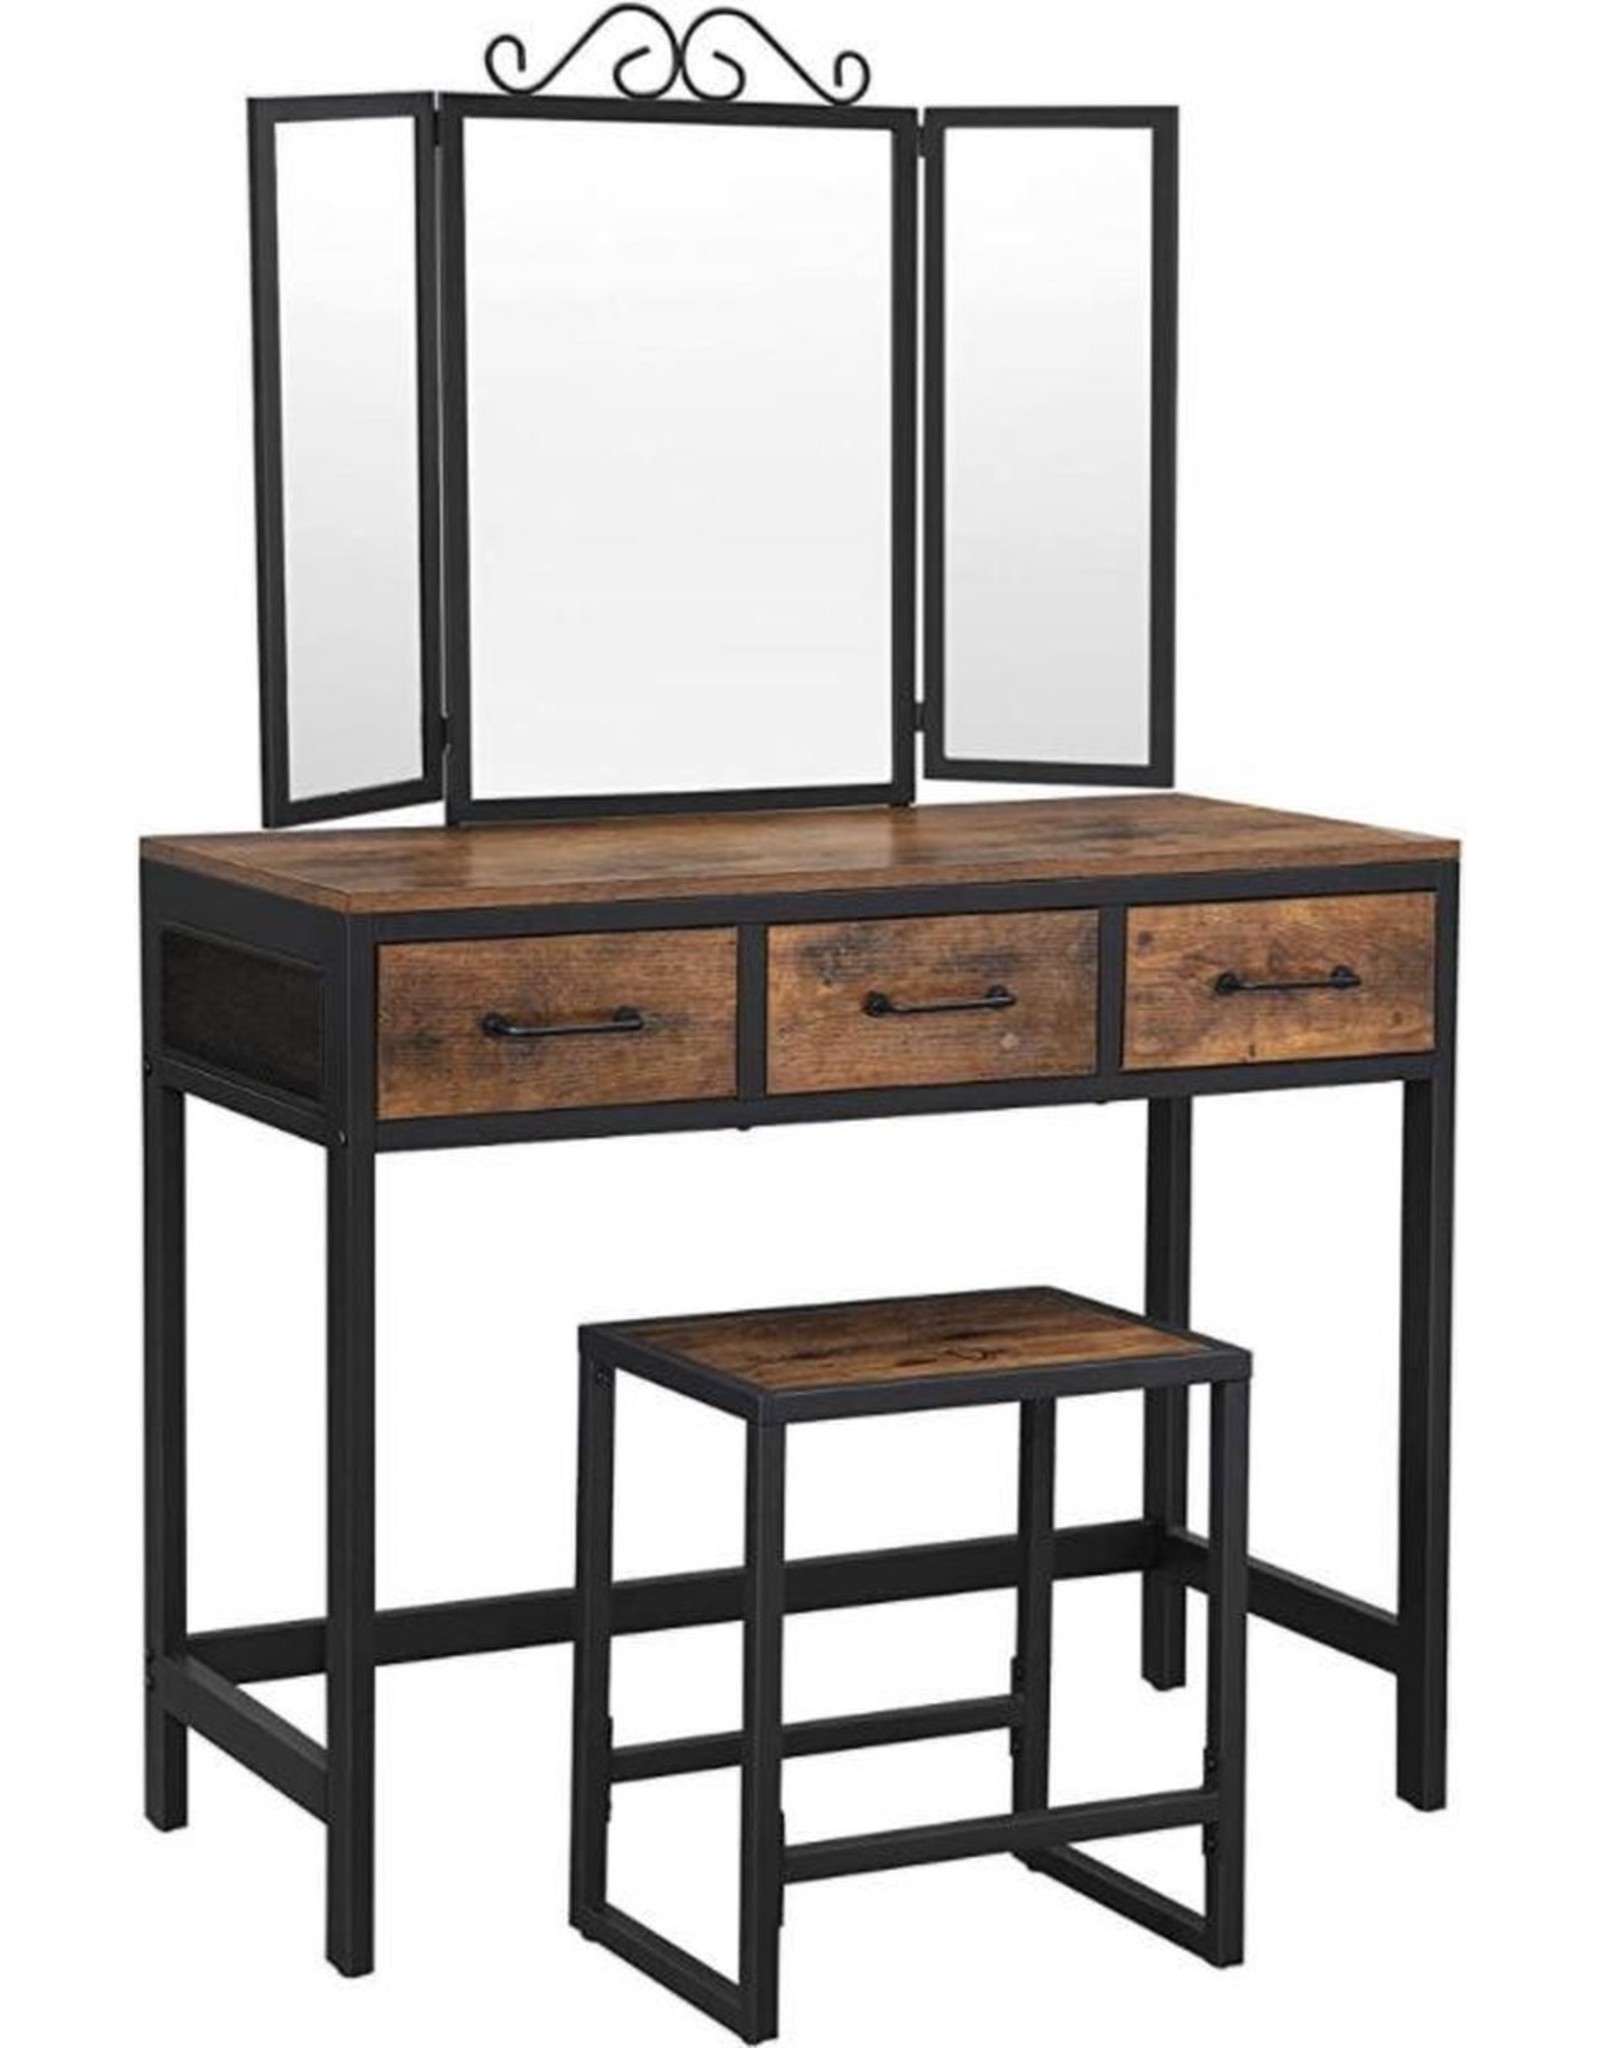 Songmics - make up table - with 3 piece folding mirror - 3 drawers - Steel frame - with stool - industrial design